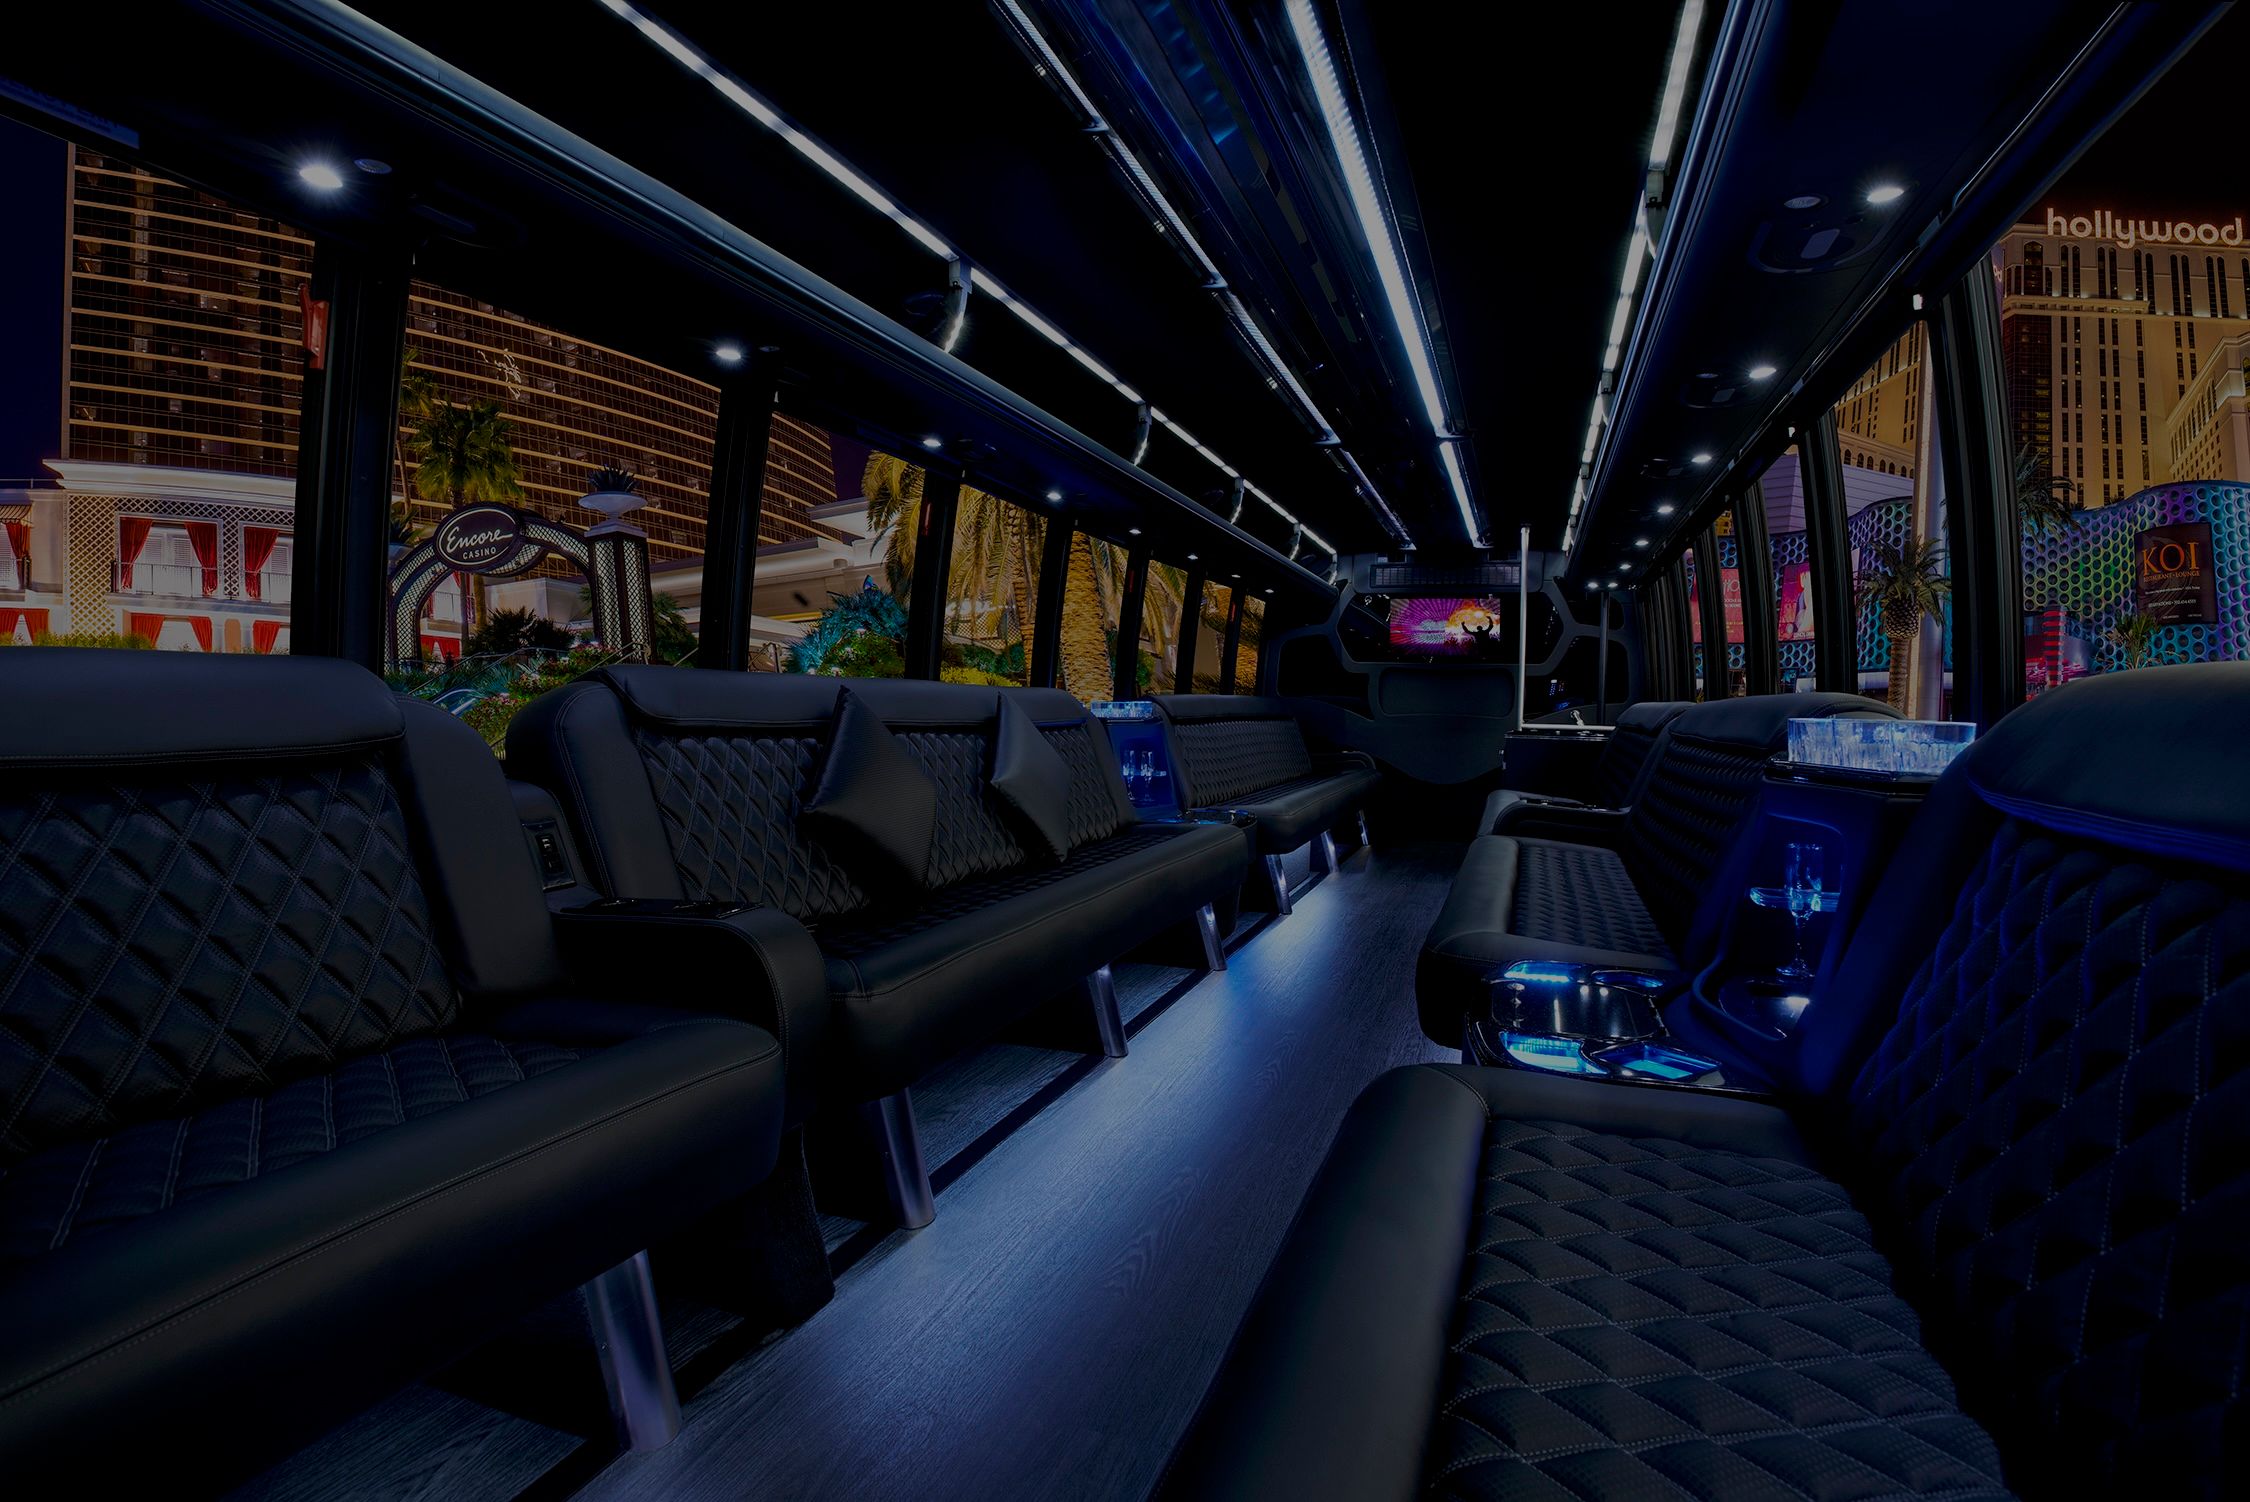 Party Bus Rentals Near Me: Compare Prices